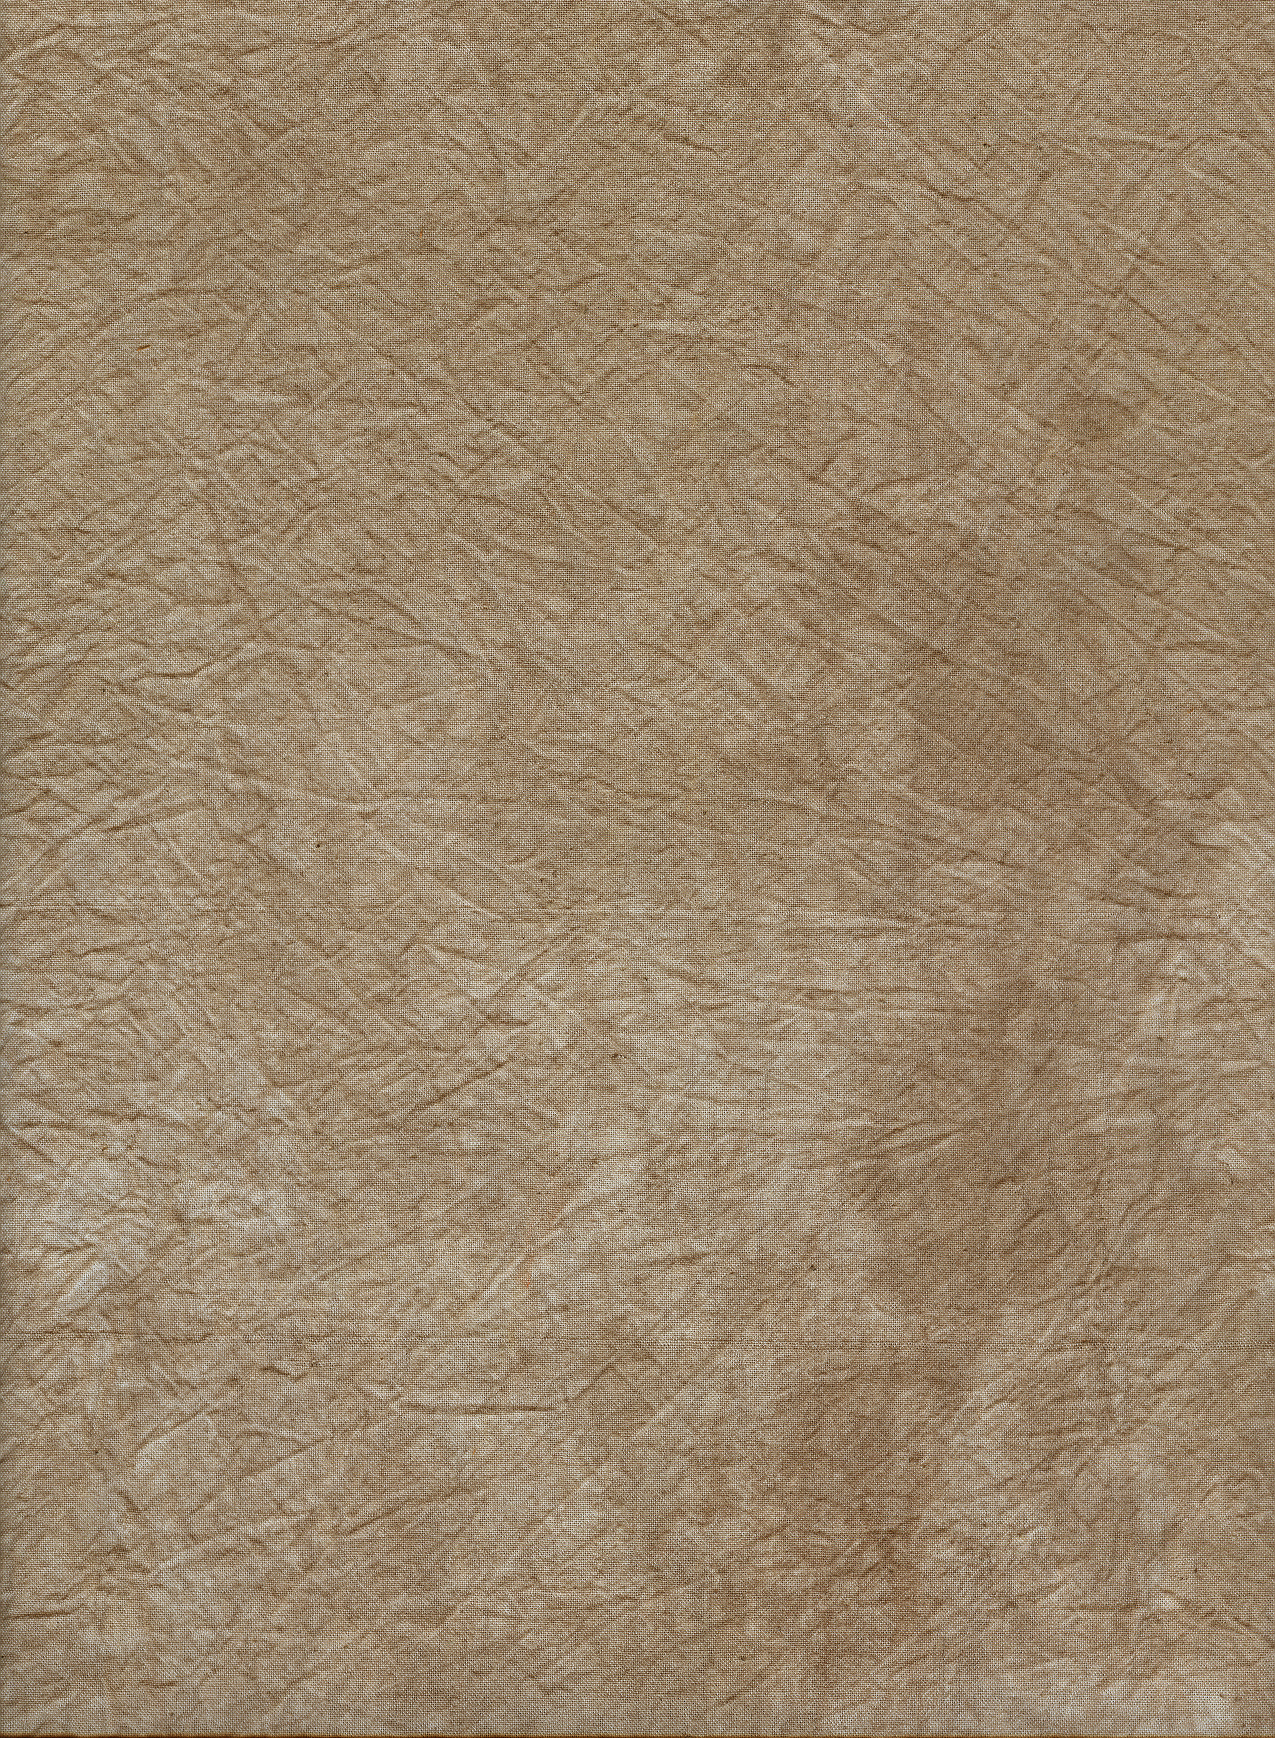 Promaster 9429  10'x20' Patterned Muslin Backdrop - Brown